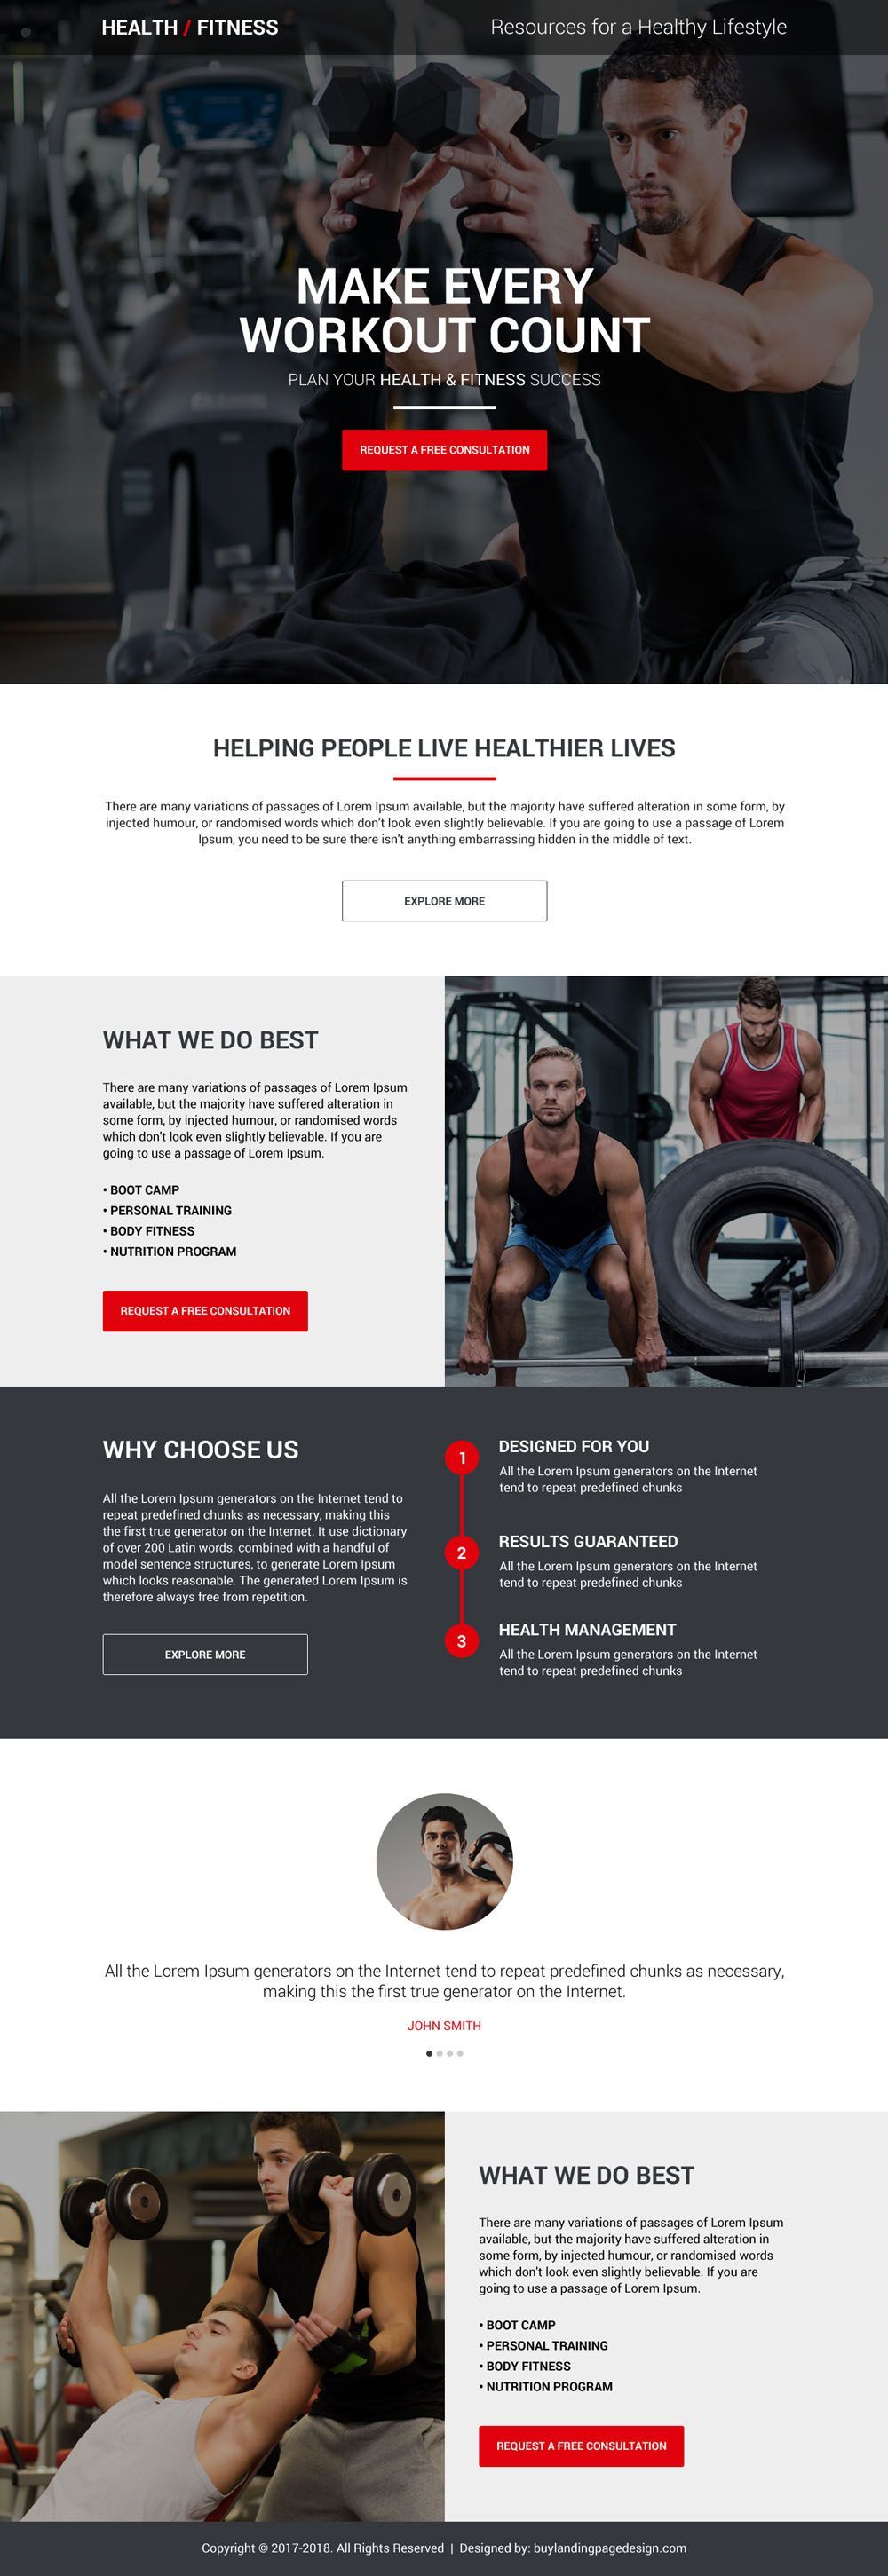 health-and-fitness-free-consultation-lp-10 | Health and Fitness Landing Page preview. - health-and-fitness-free-consultation-lp-10 | Health and Fitness Landing Page preview. -   14 fitness Design concept ideas